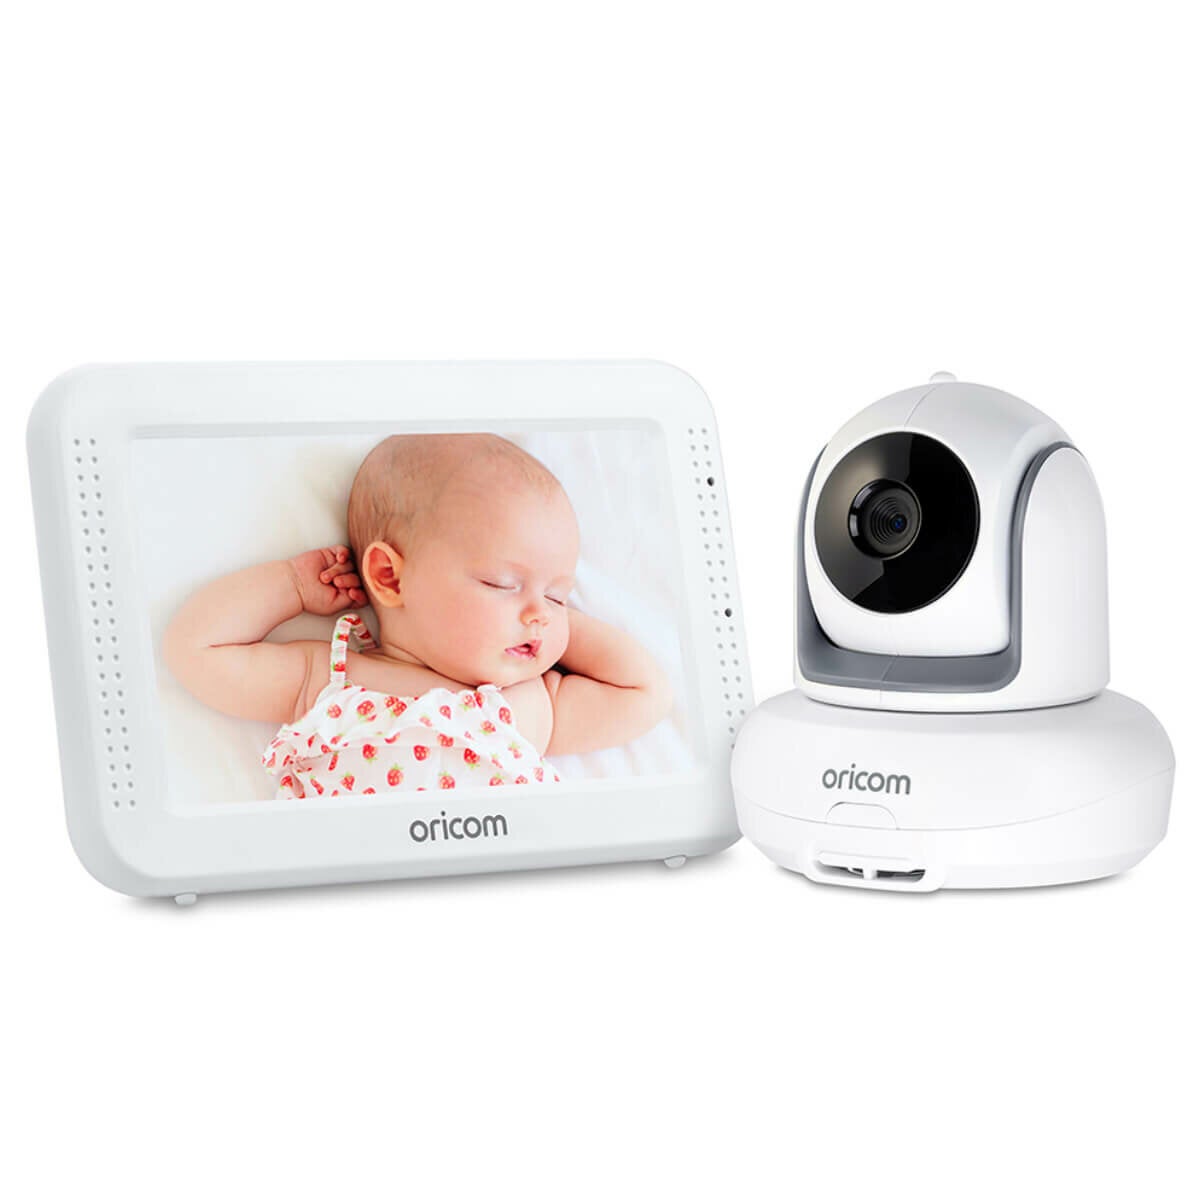 Image of Oricom 5 Inch Touchscreen Video Baby Monitor SC875